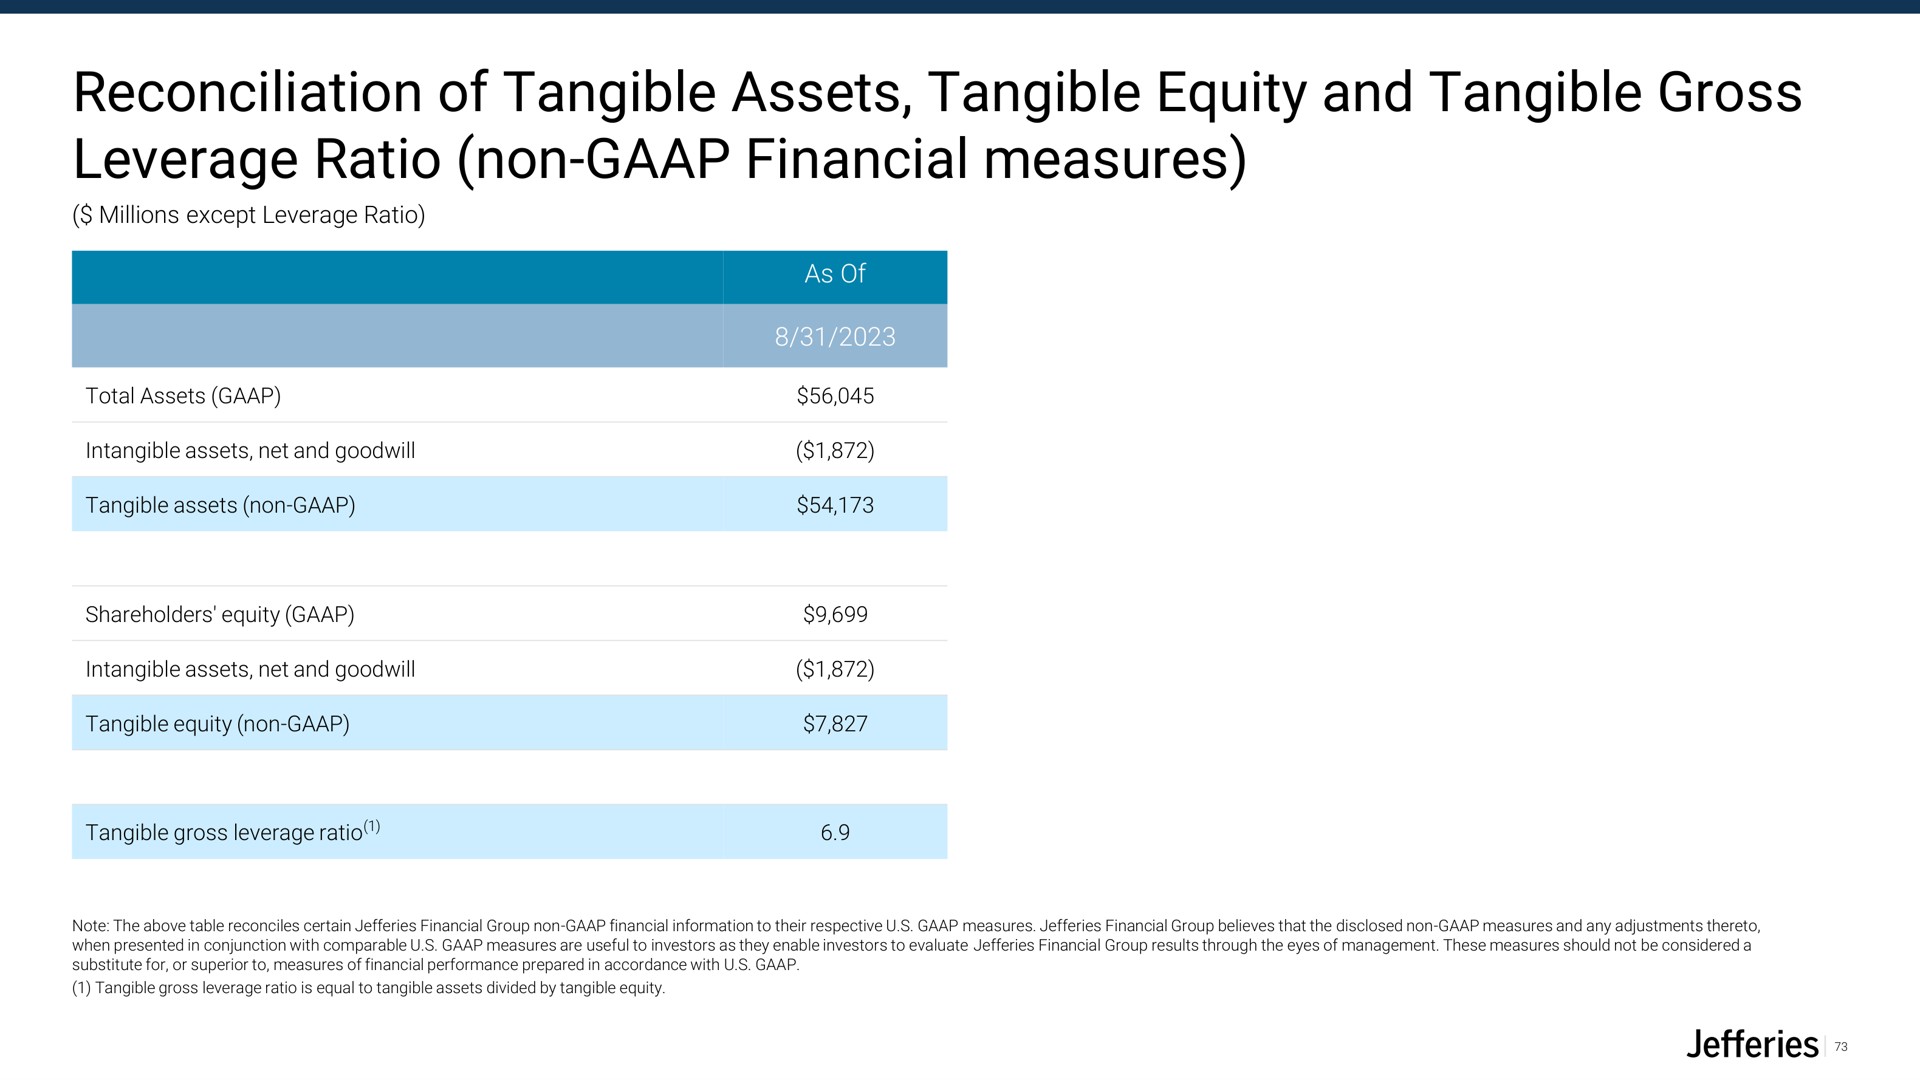 reconciliation of tangible assets tangible equity and tangible gross leverage ratio non financial measures note the above tables reconcile certain financial group non financial information to their respective measures financial group believes that the disclosed non measures and any adjustments thereto when presented in conjunction with comparable measures are useful to investors as they enable investors to evaluate financial group results through the eyes of management these measures should not be considered a substitute for or superior to measures of financial performance prepared in accordance with | Jefferies Financial Group